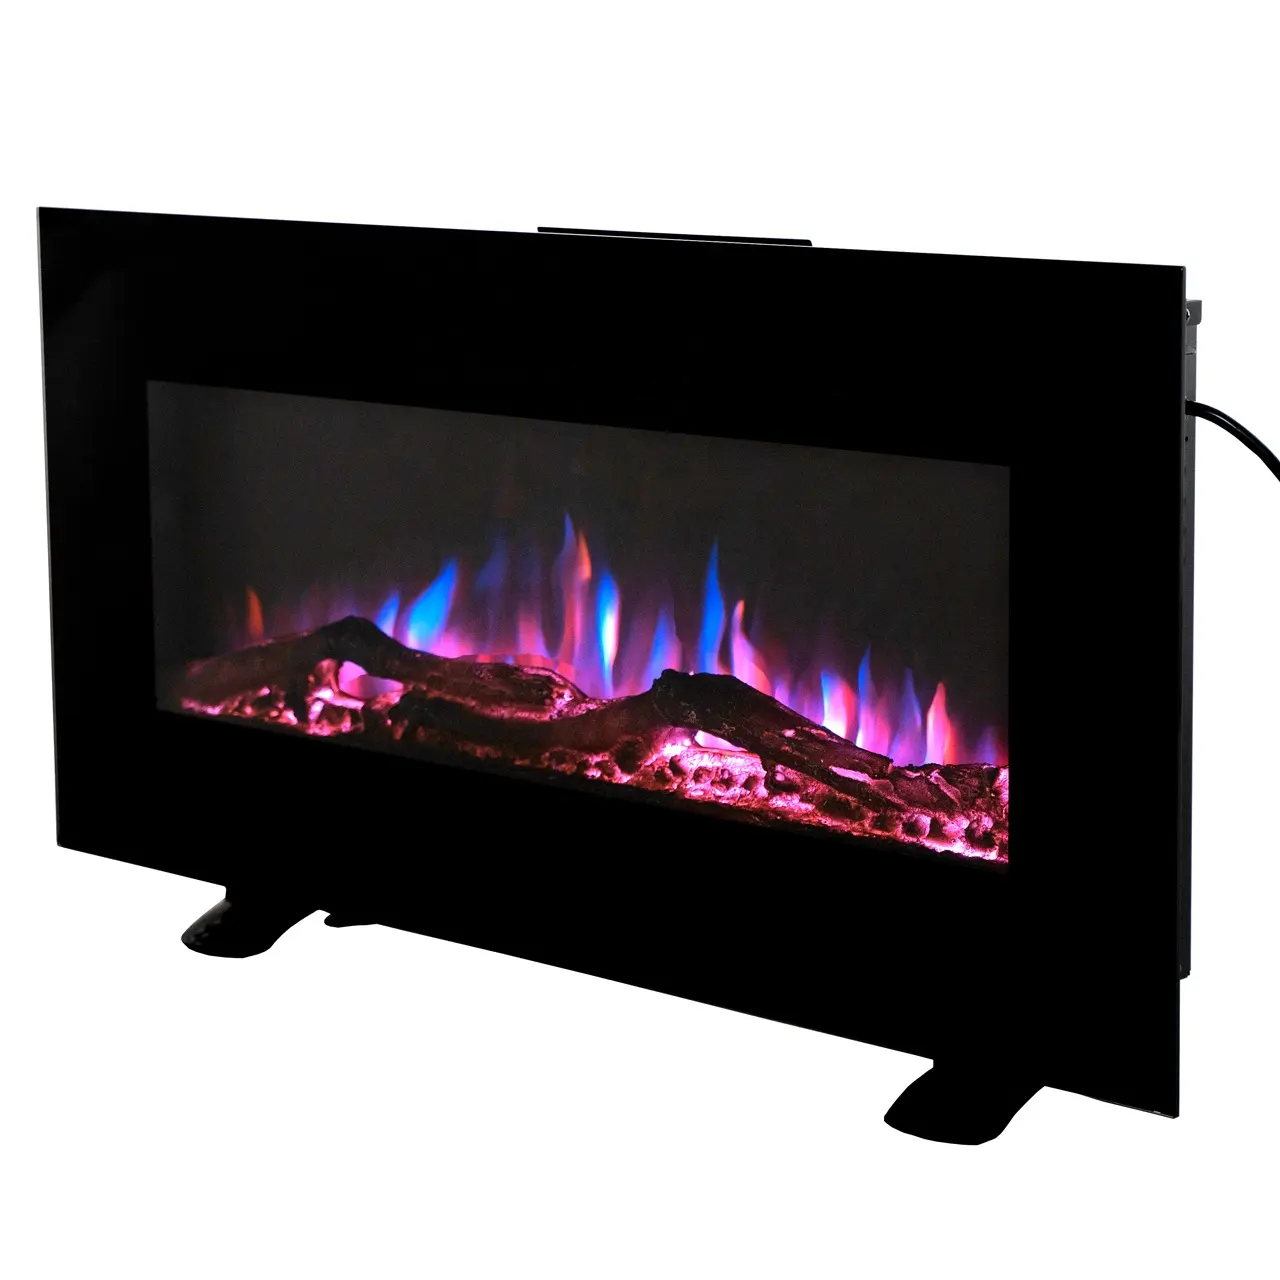 34 INCH WALL MOUNTED FIREPLACE REMOTE CONTROL 6 FLAME COLORS THERMOSTAT ADJUSTABLE FLAME BRIGHTNESS AND SPEED